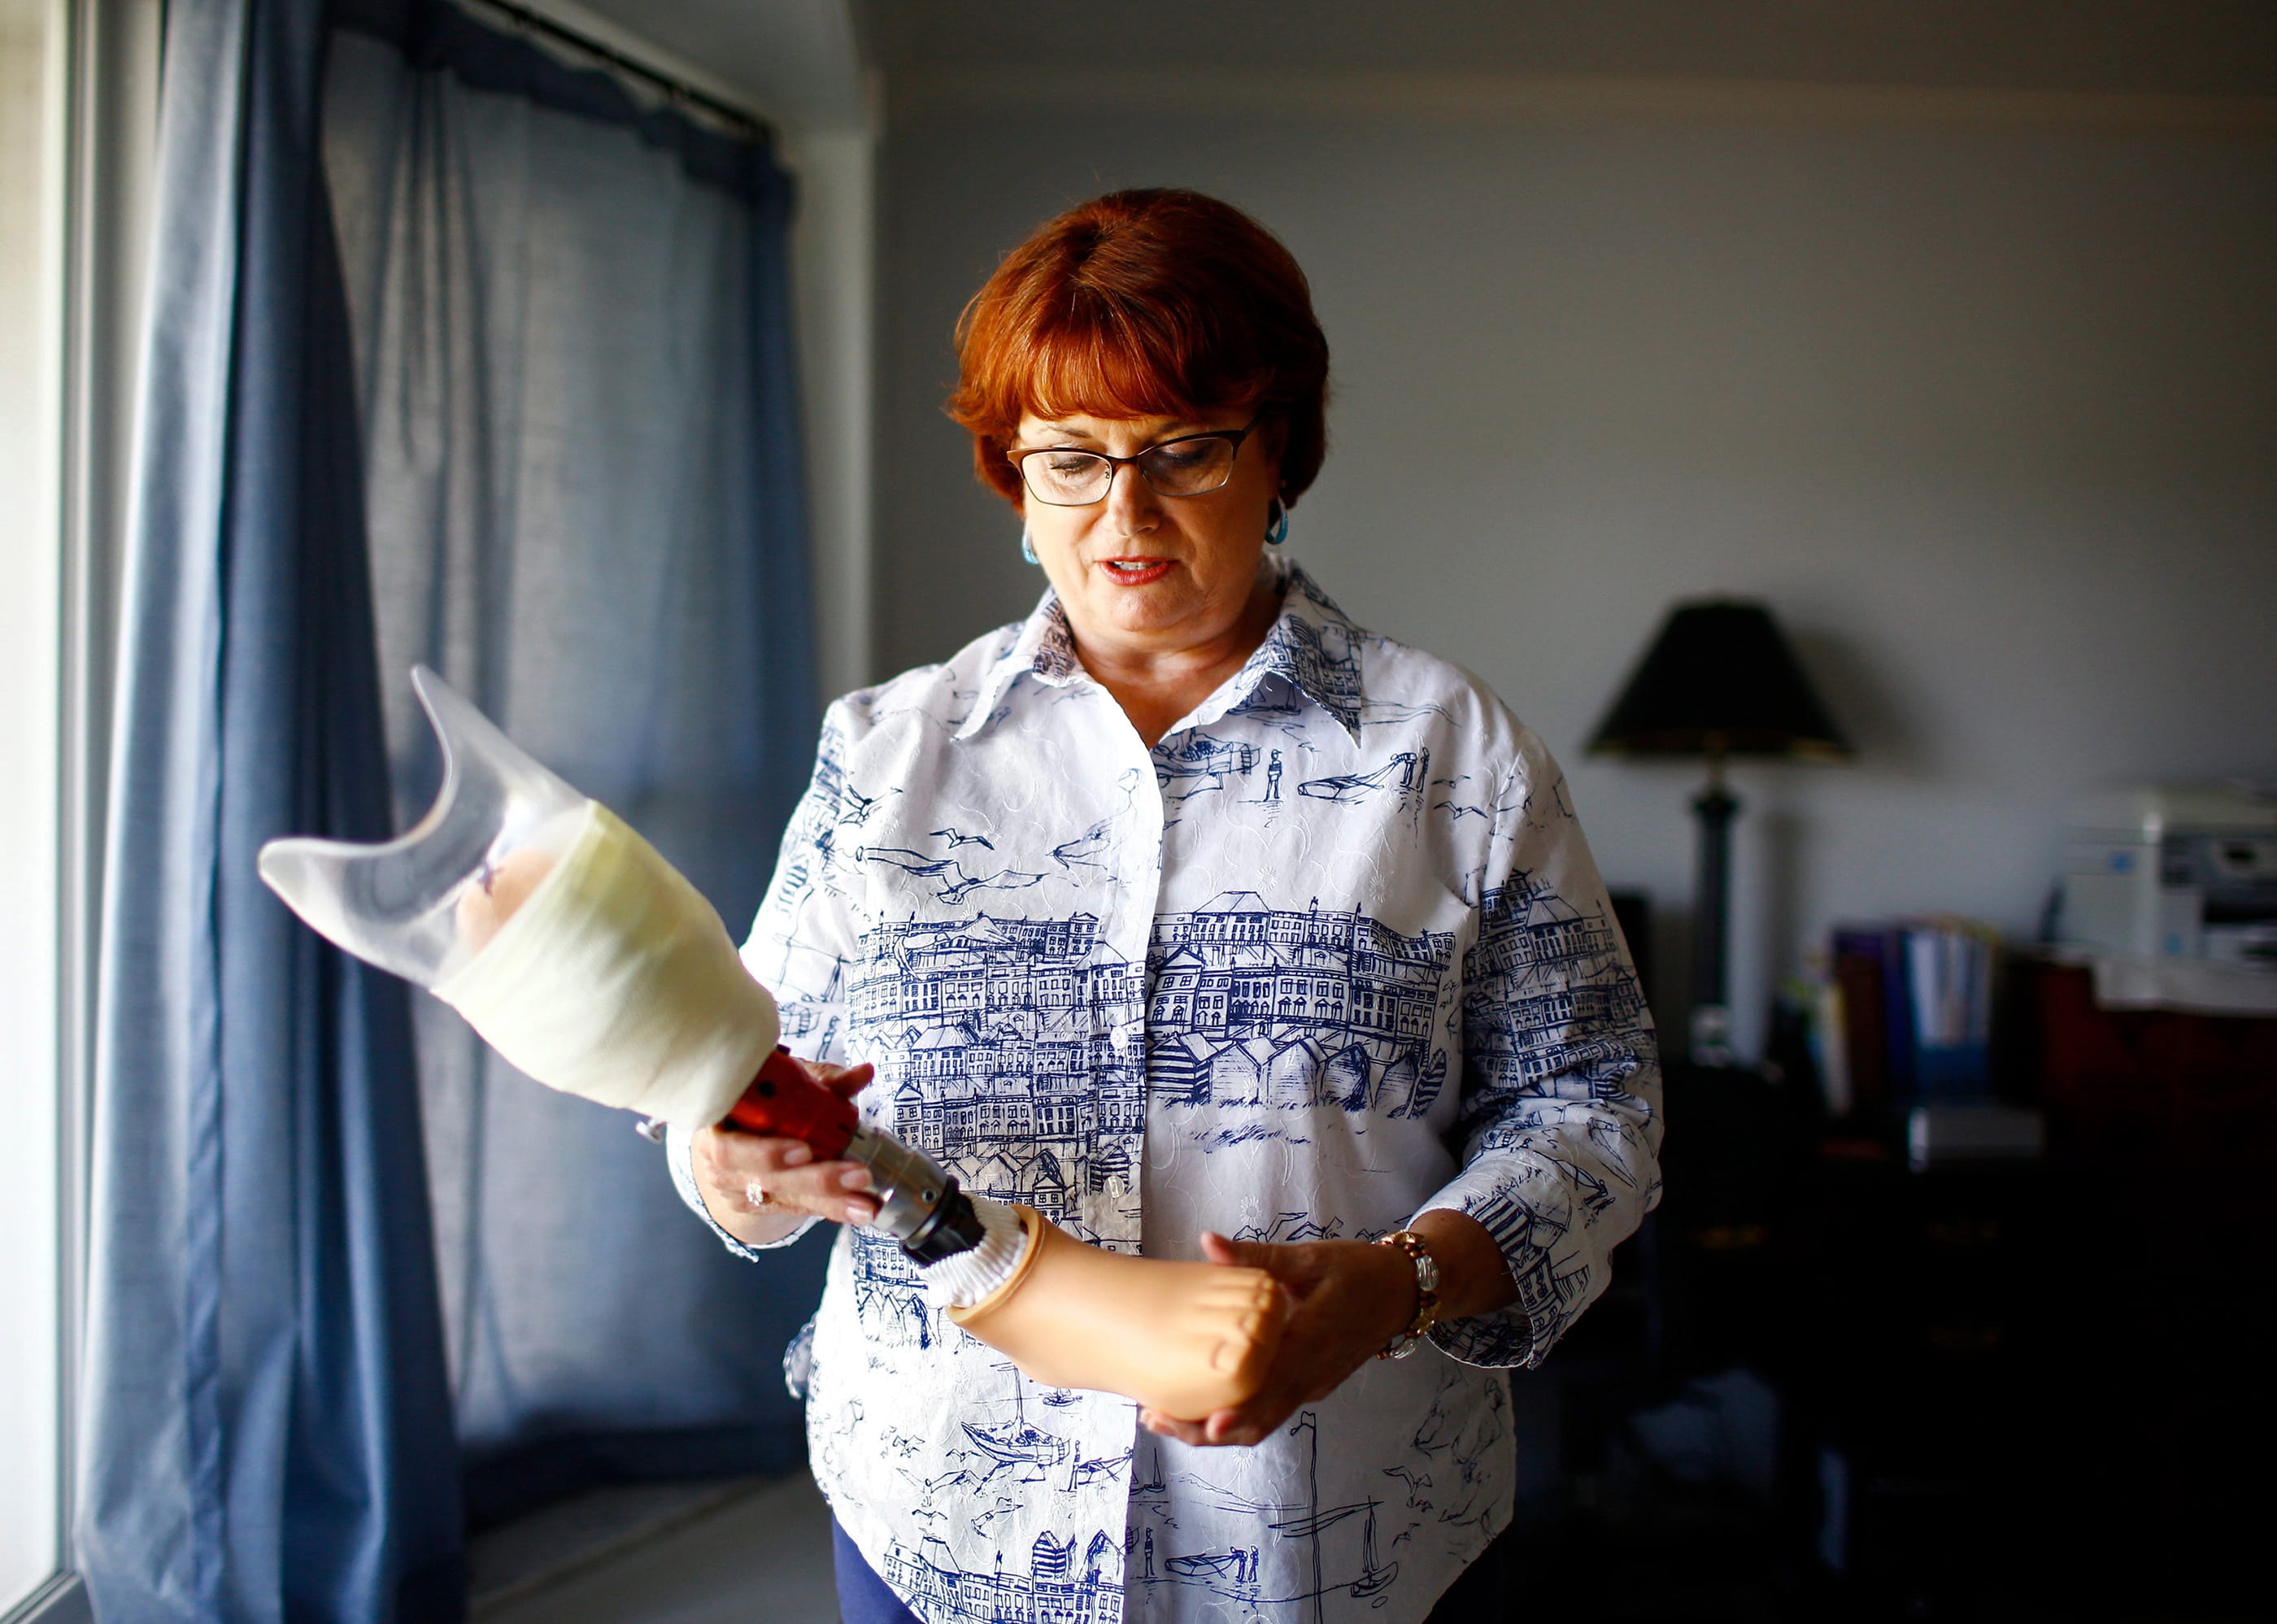 Army veteran Brenda Reed, 59, of Tierra Verde, Fla., has not been able to be successfully fitted with a woman's prosthetic foot since her left foot was amputated in 2013.   She underwent three failed surgeries to correct the damage from a severe break in 1983 while serving in the Army.